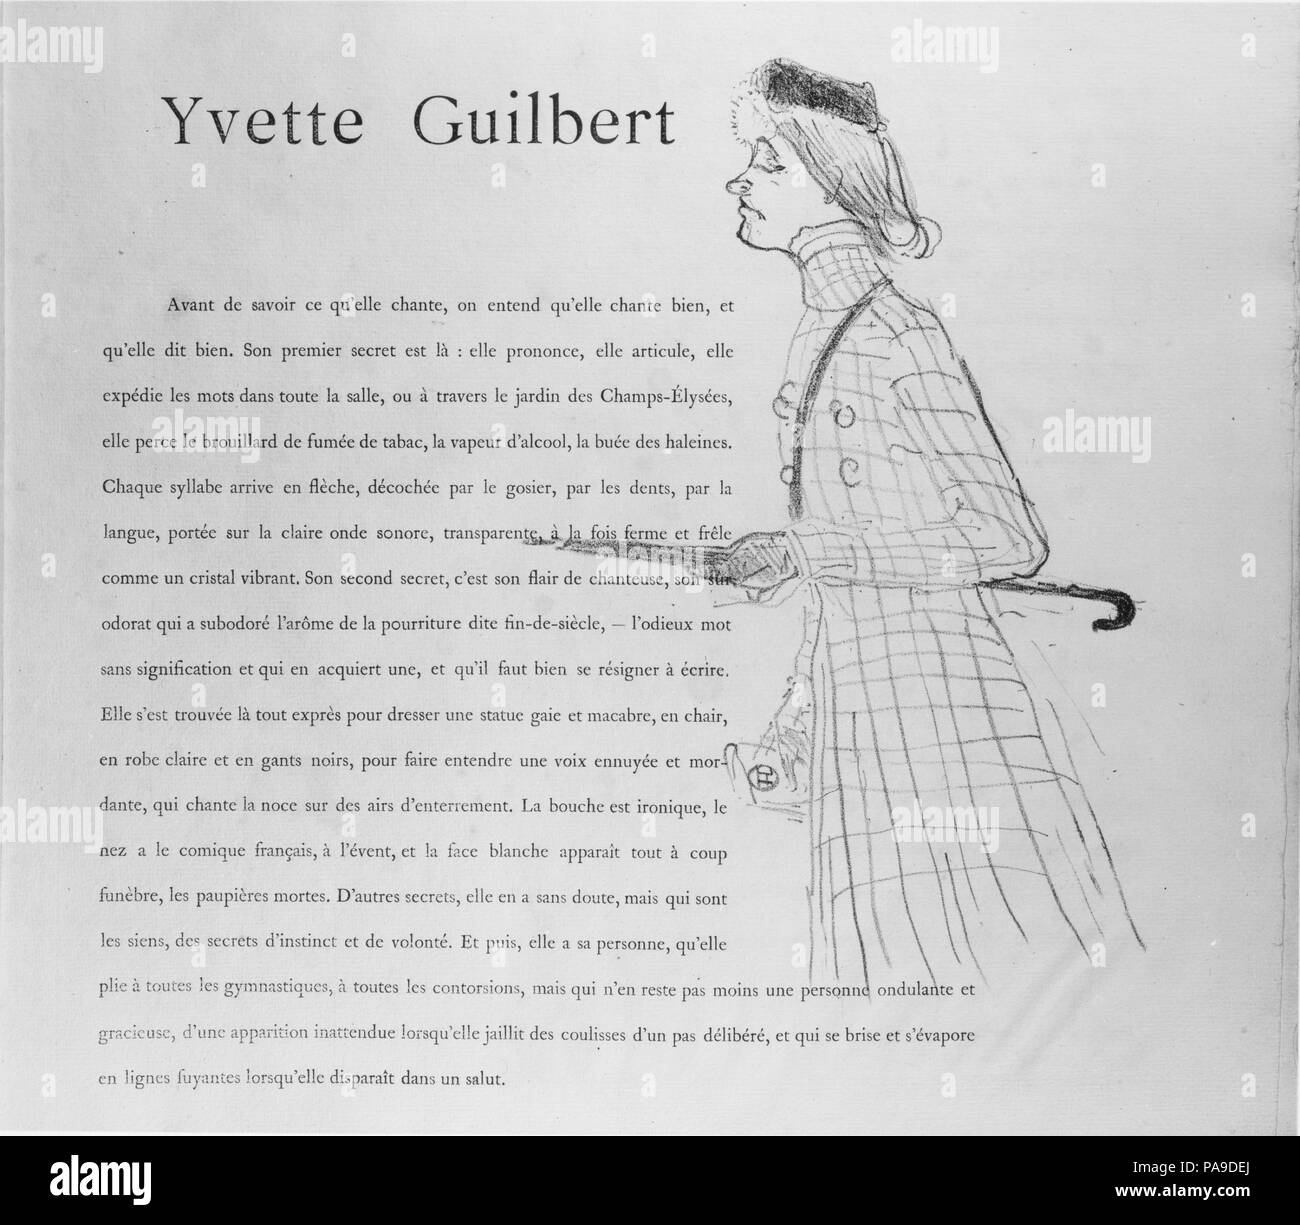 Yvette Guilbert. Artist: Henri de Toulouse-Lautrec (French, Albi 1864-1901 Saint-André-du-Bois). Author: Gustave Geffroy (French, Paris 1855-1926 Paris). Dimensions: 16 in. × 15 1/8 in. (40.6 × 38.4 cm)  Sheet: 15 × 15 in. (38.1 × 38.1 cm). Printer: Images printed by Edward Ancourt (French, 19th century); Text printed by Frémont (French, active 19th century). Publisher: André Marty (French, born 1857); l'Estampe Originale. Date: 1894. Museum: Metropolitan Museum of Art, New York, USA. Stock Photo